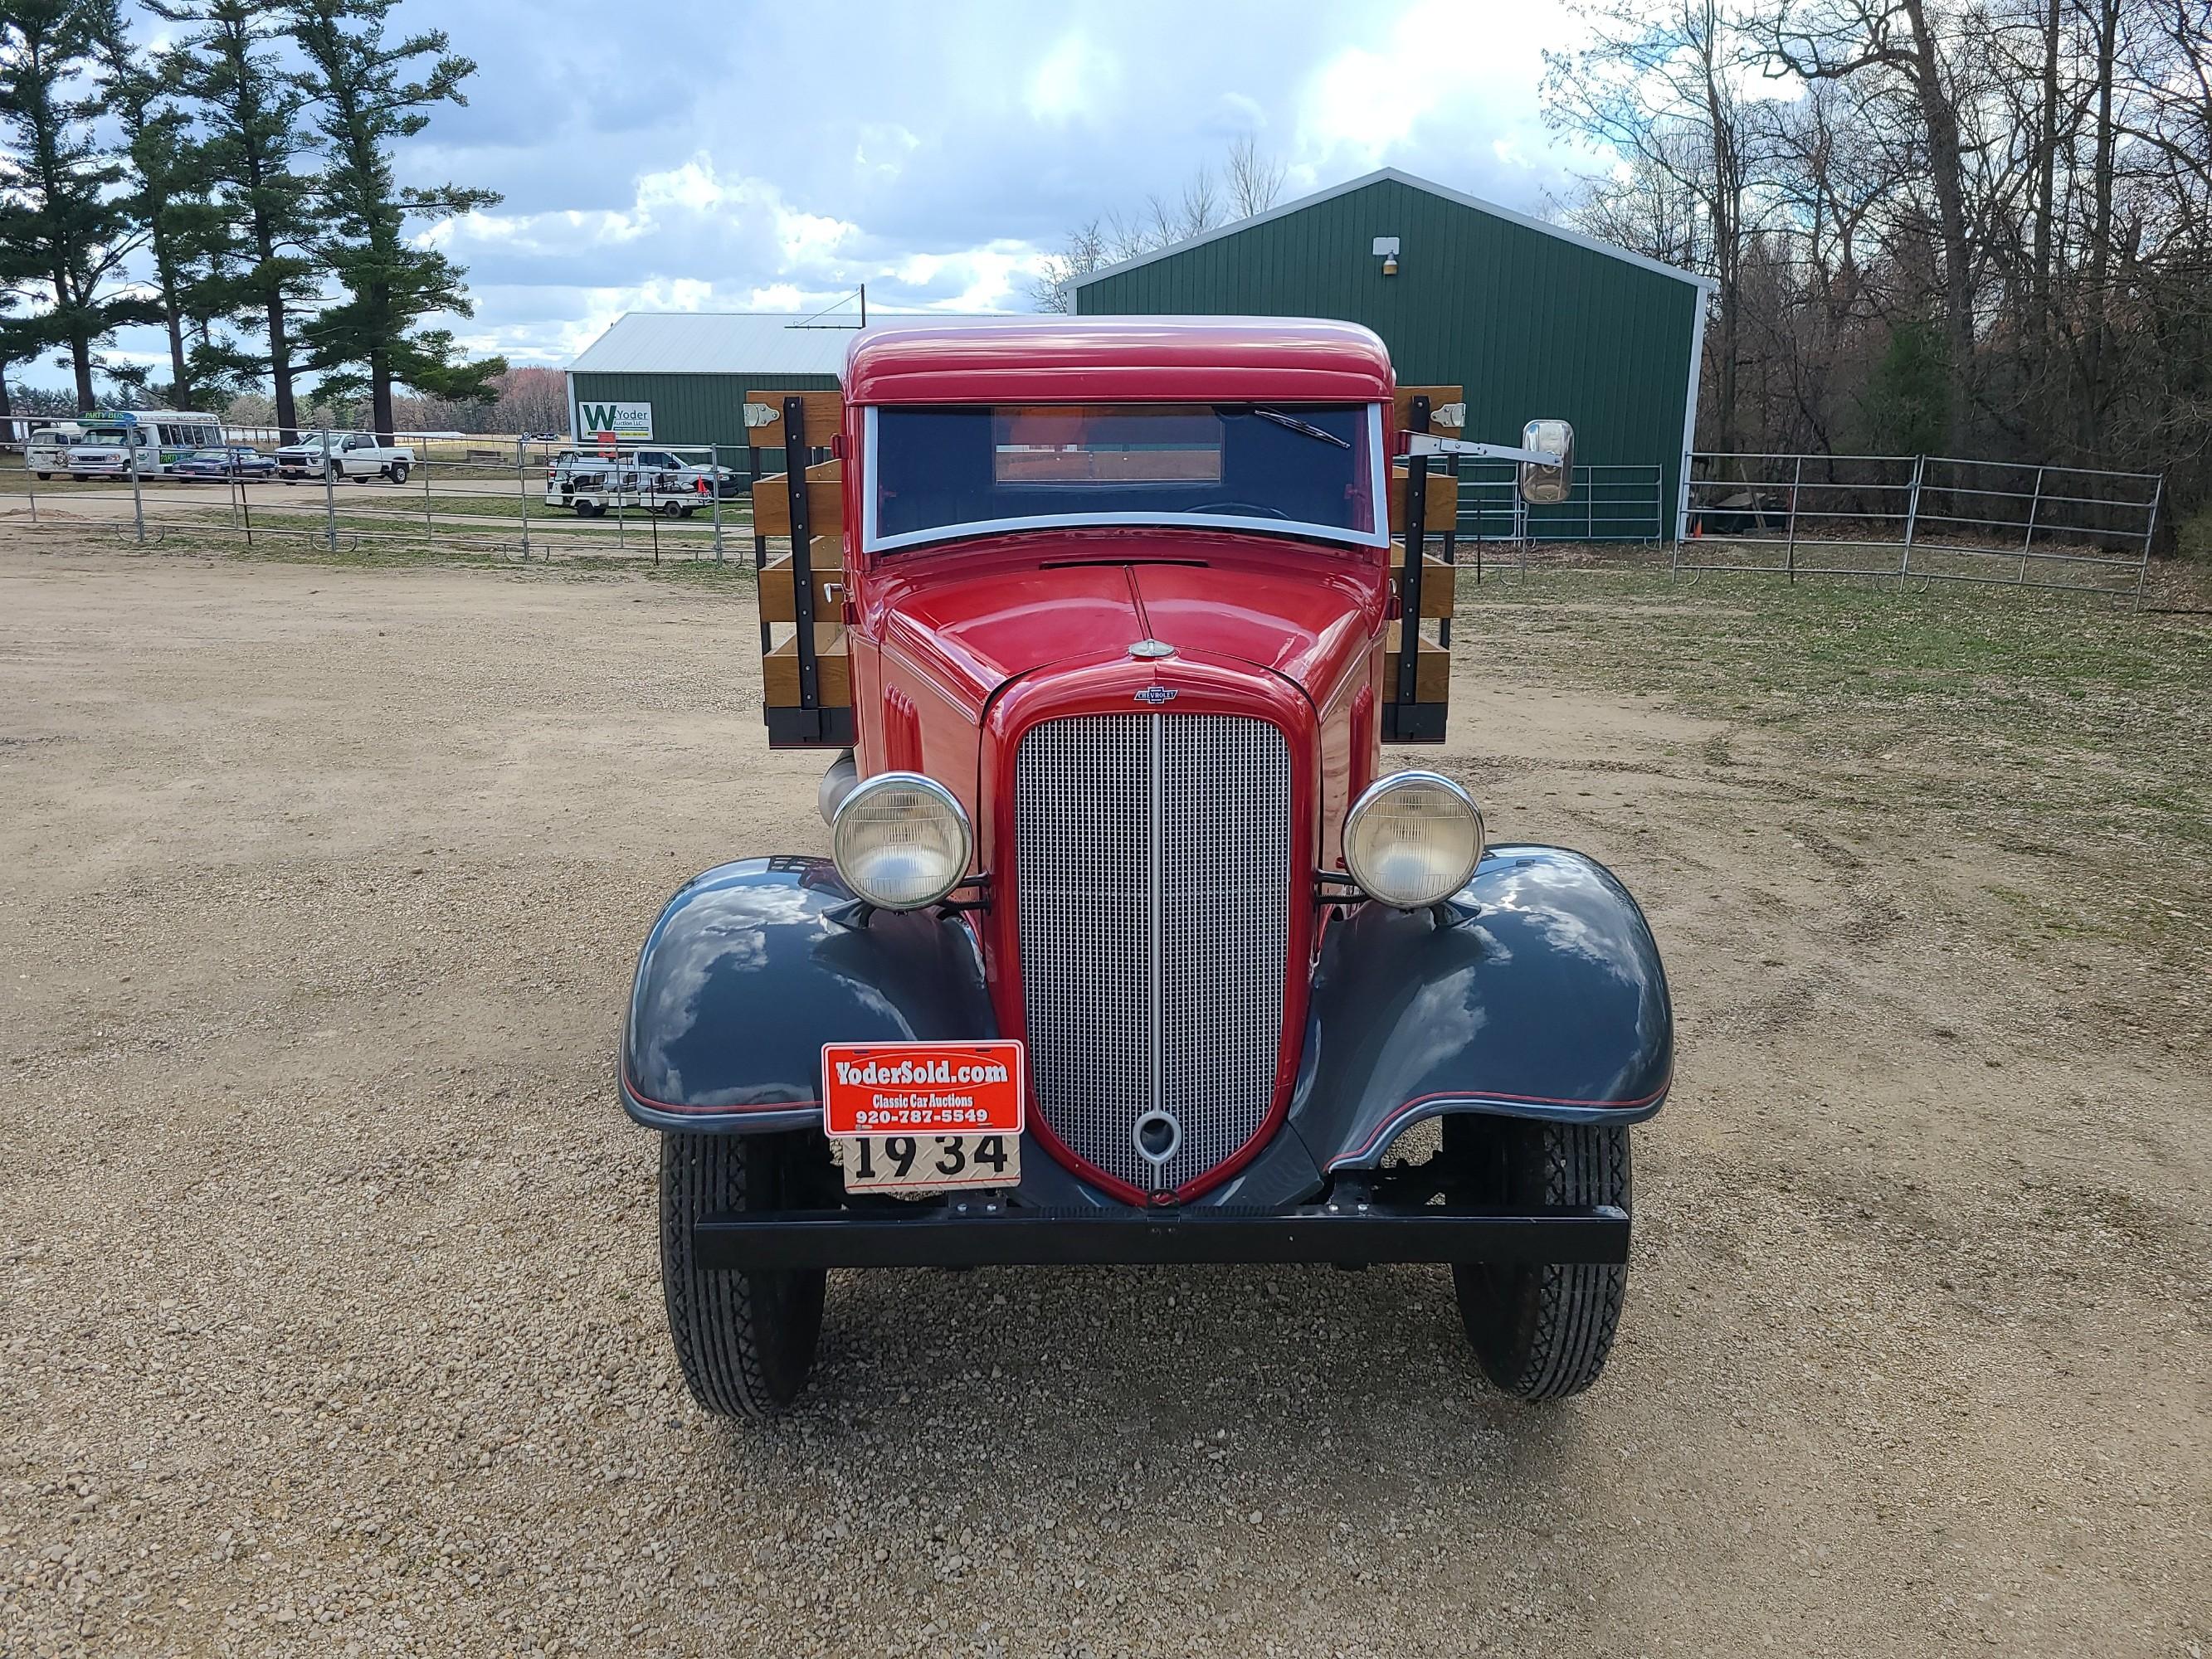 1934 Chevrolet Stake Bed Truck